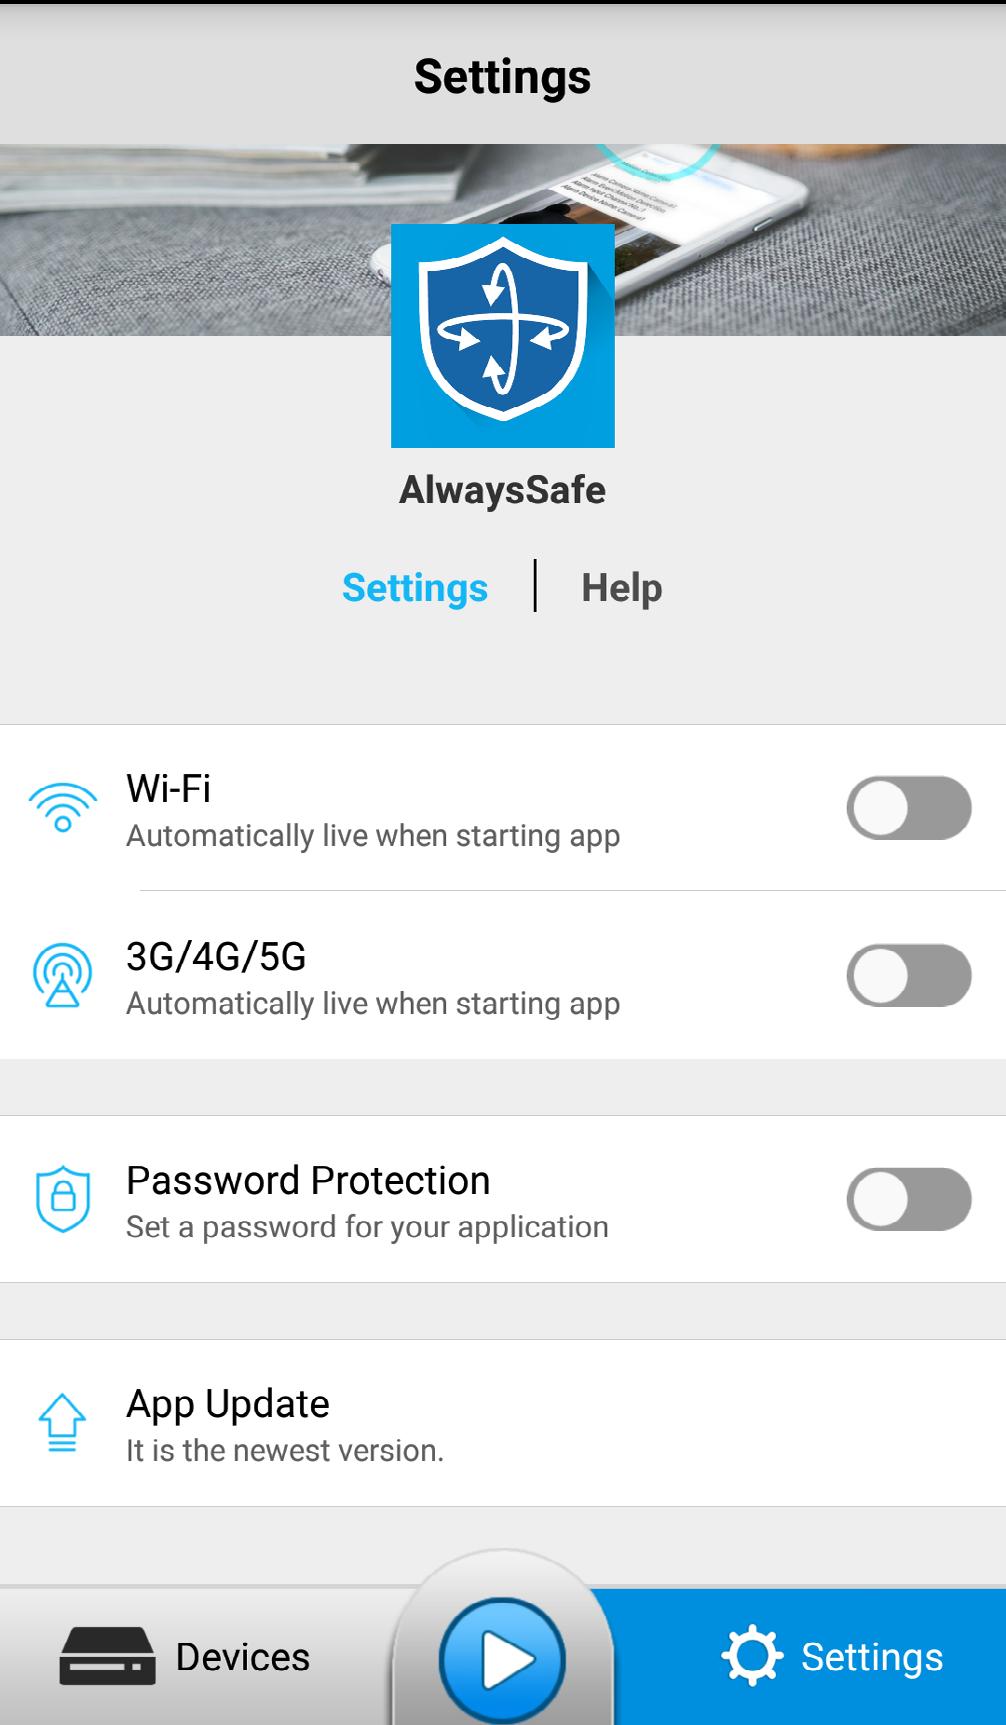 App General Settings 1 2 3 4 Settings 1 2 When your smartphone is connected to the Wi-Fi network, you can choose whether to allow the app to automatically start live streaming once it s launched.